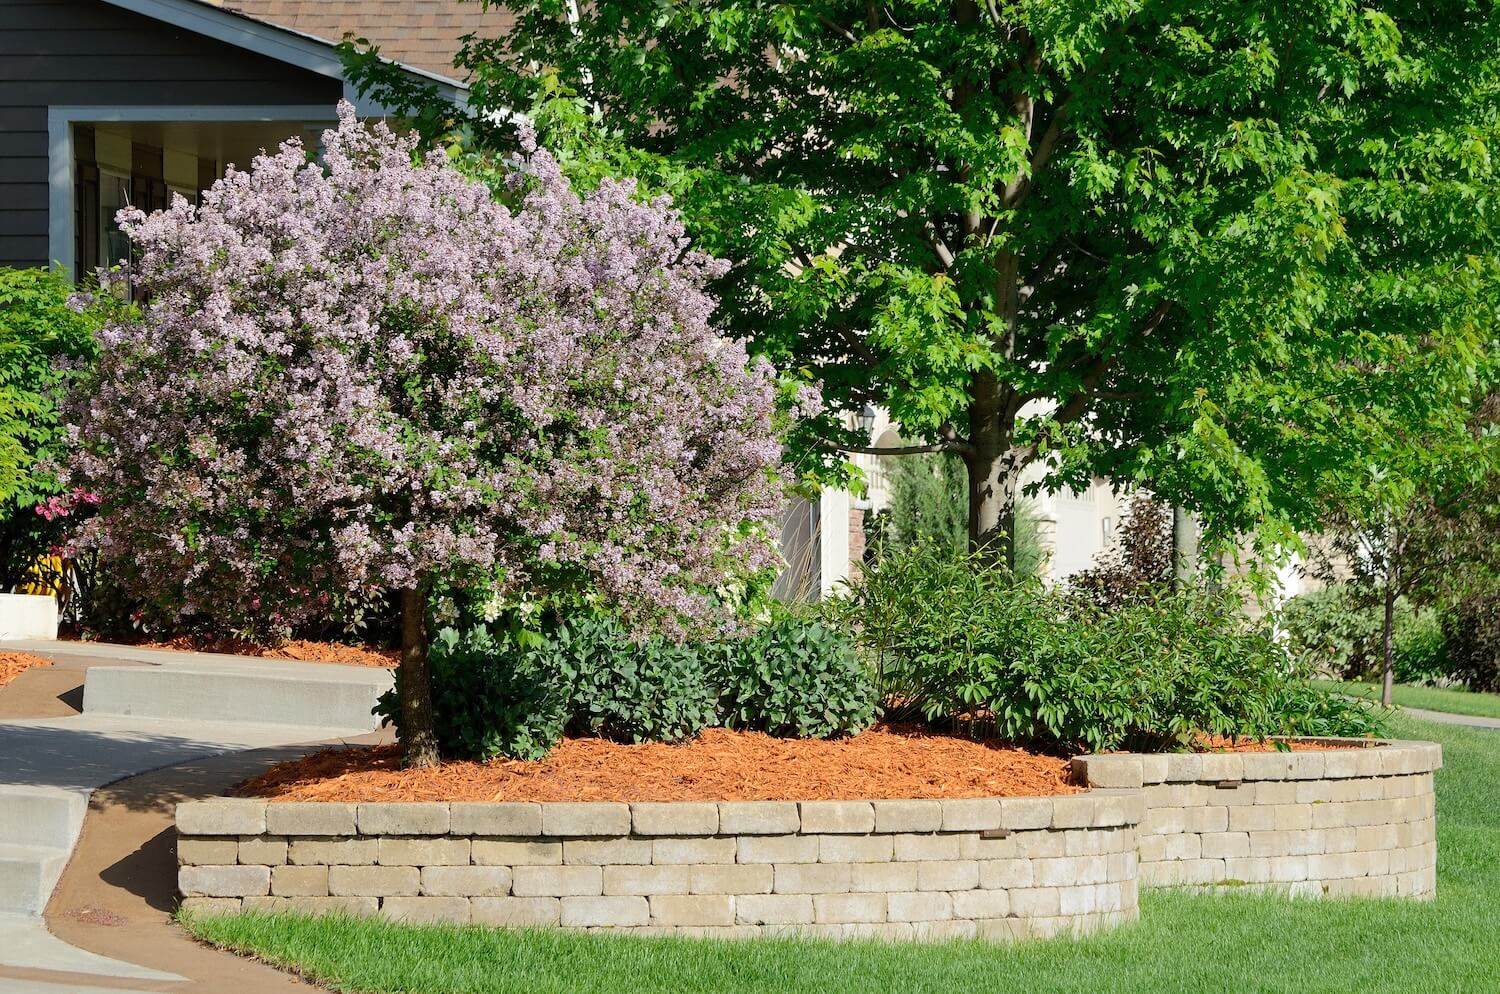 Fix Your Outdoor Space With Professionally Installed Pavers